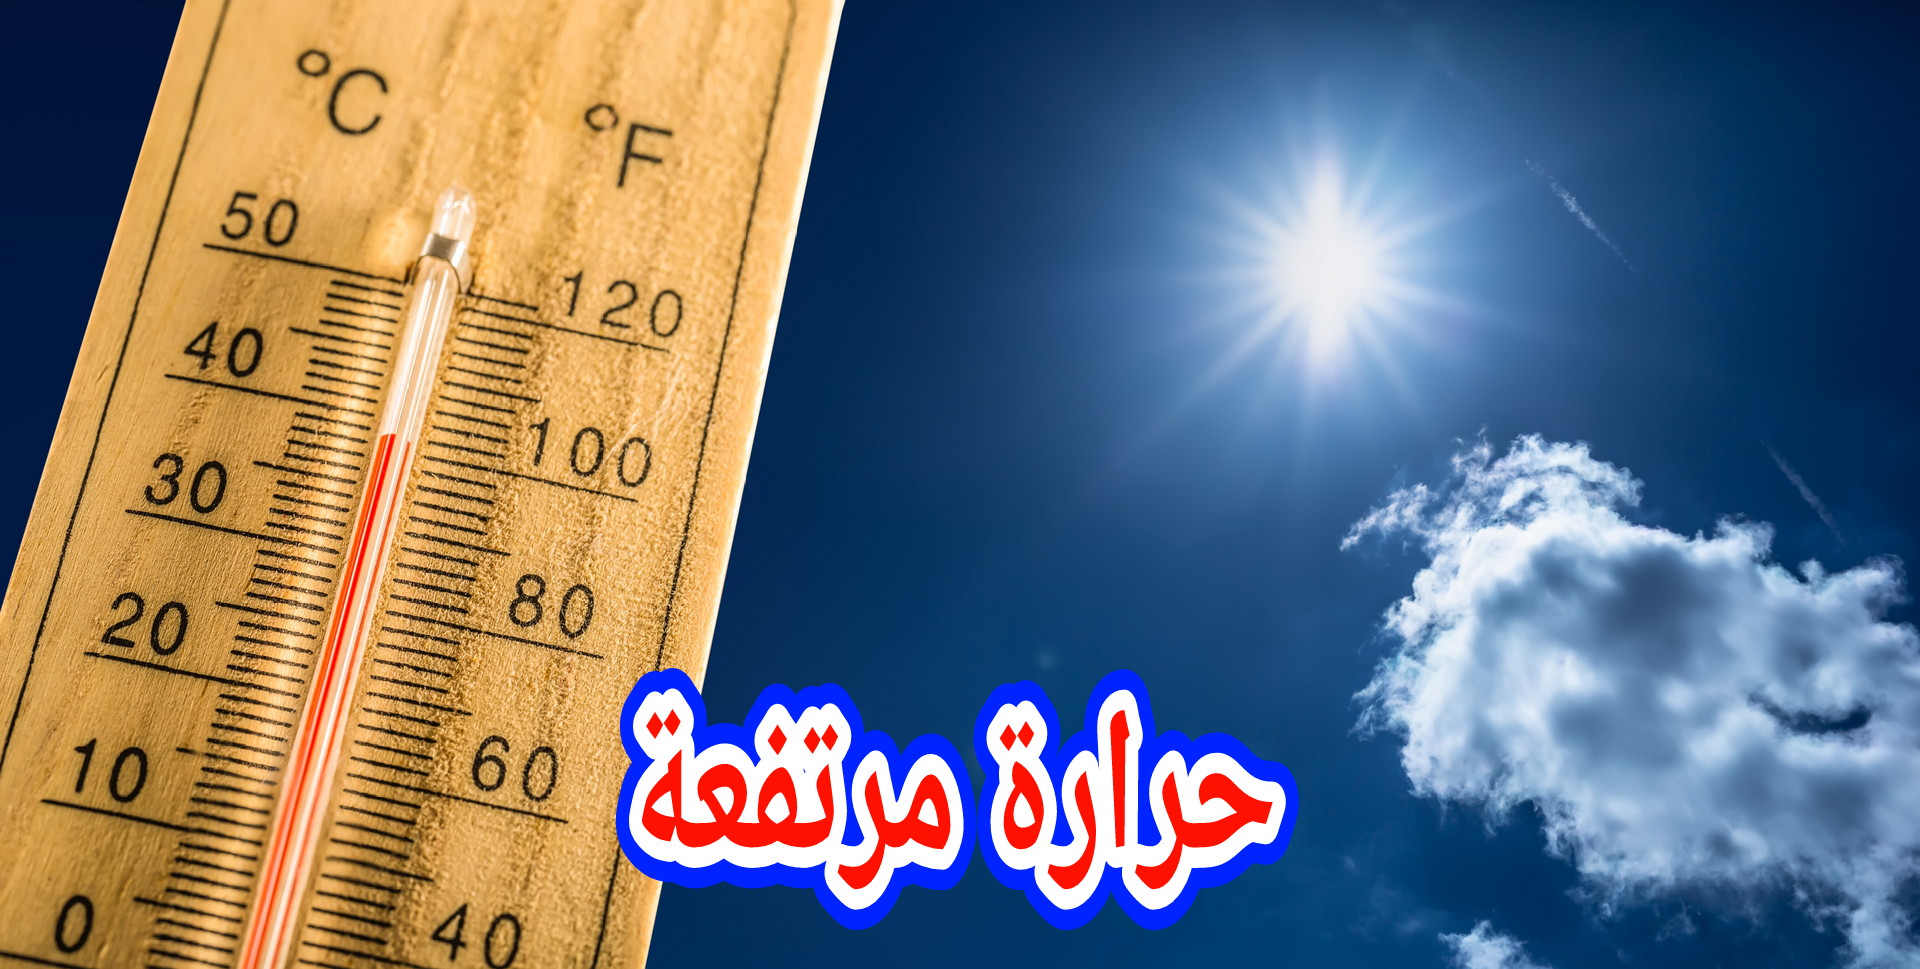 Hot summer day and forty degrees Celsius on a thermometer. Thermometer in summer day shows high temperature degree with sun in background.